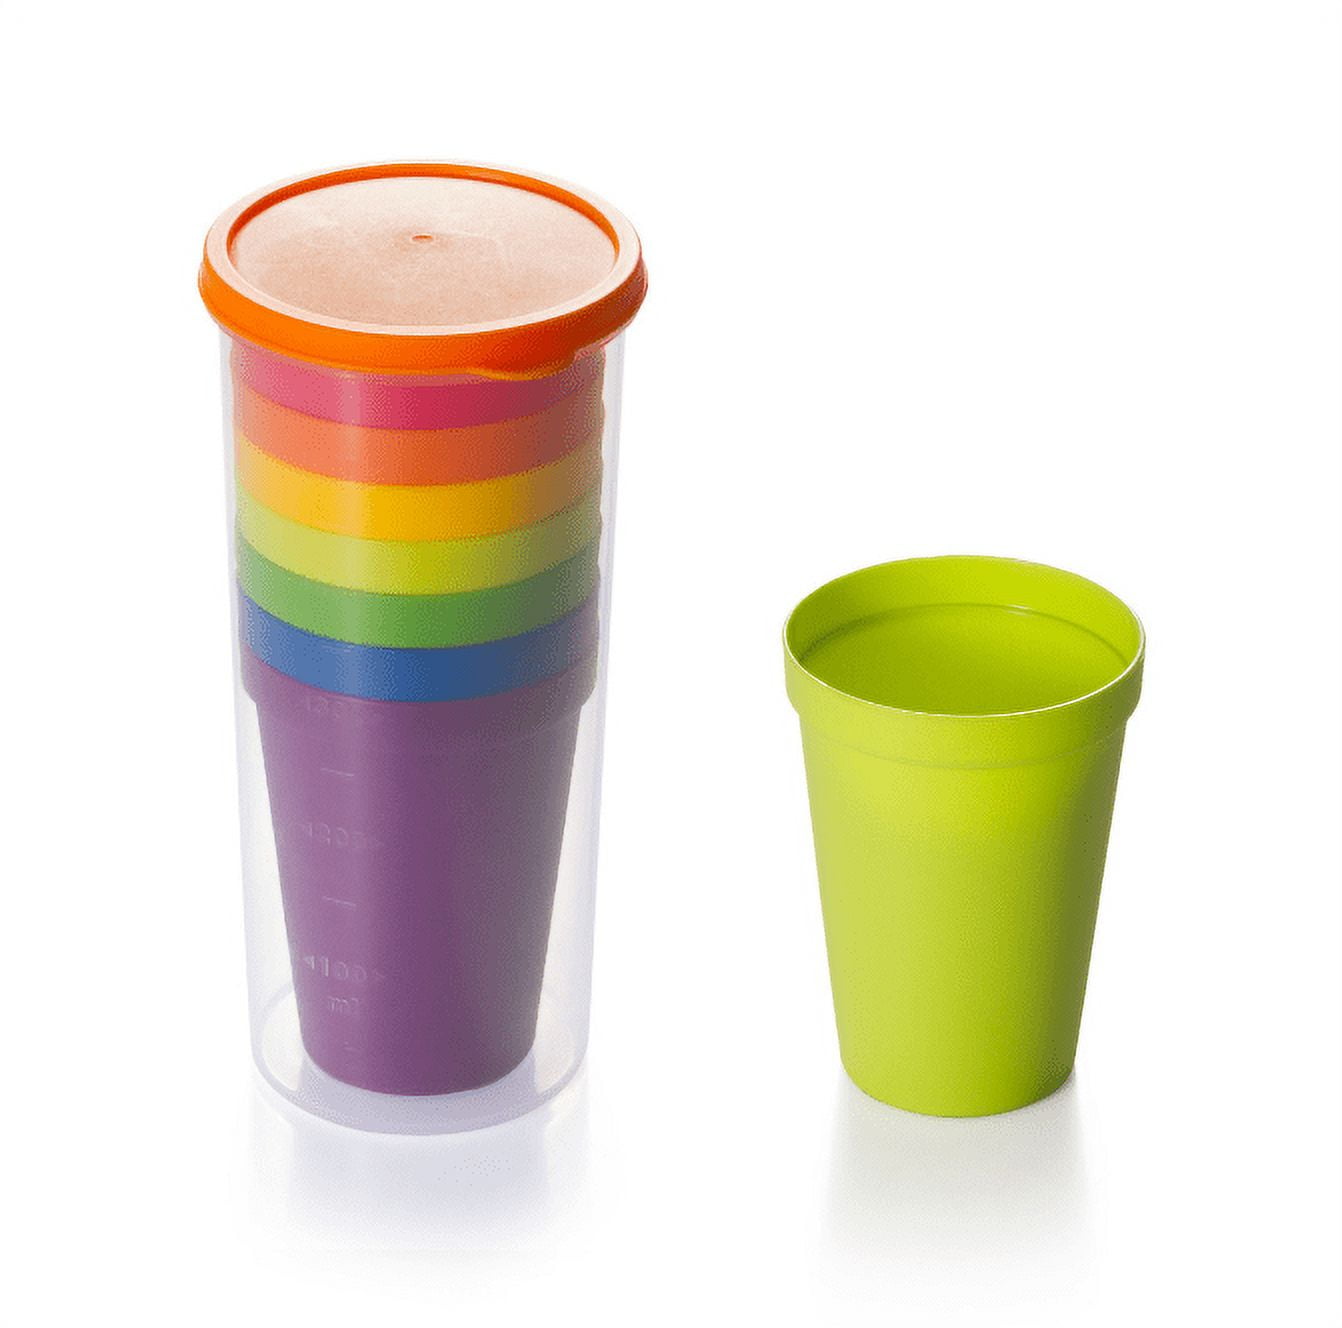 Reduce GoGo's, 3 Pack Tumbler Set – 12oz Kids Cups with Straws and Lids –  This Dishwasher Safe Toddler Cup is BPA Free – Mix and Match, 3 Fun Designs  – An